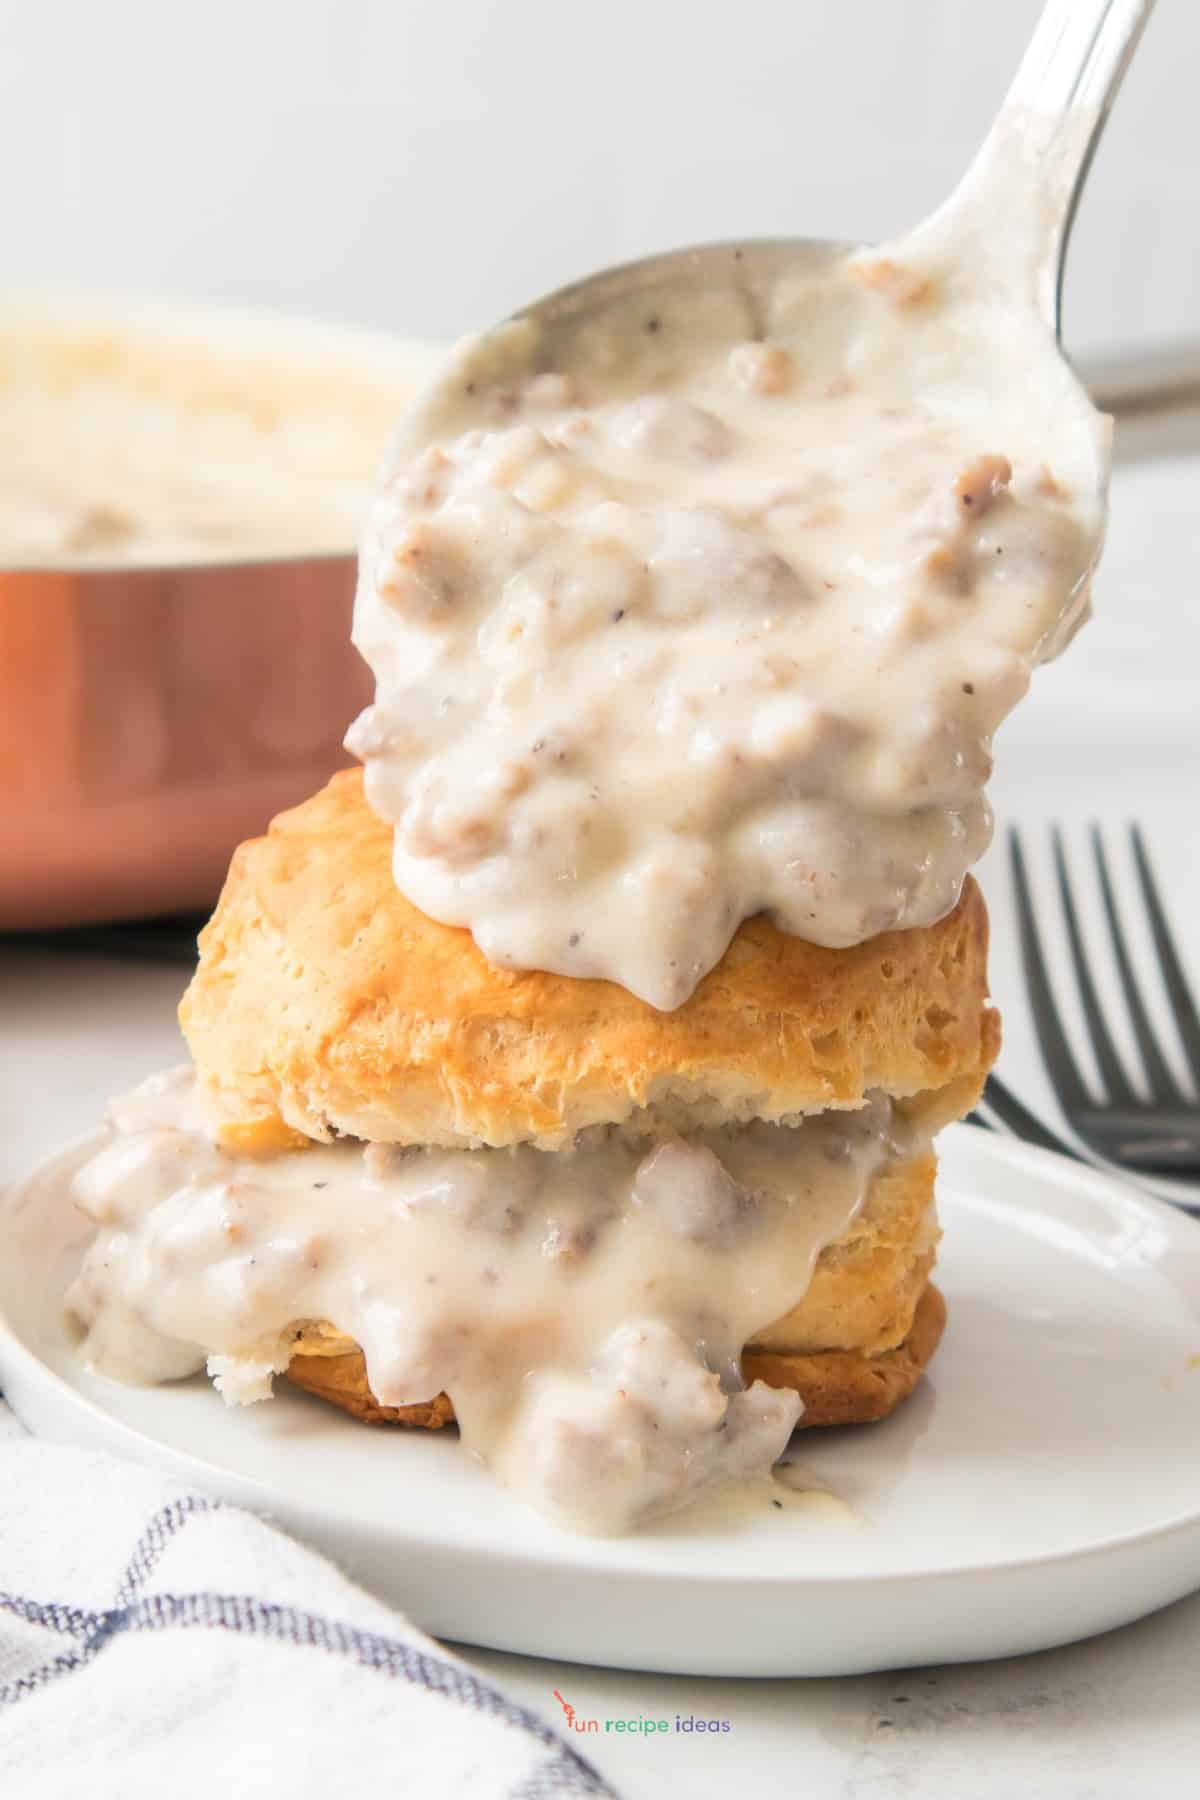 country sausage gravy over biscuits.